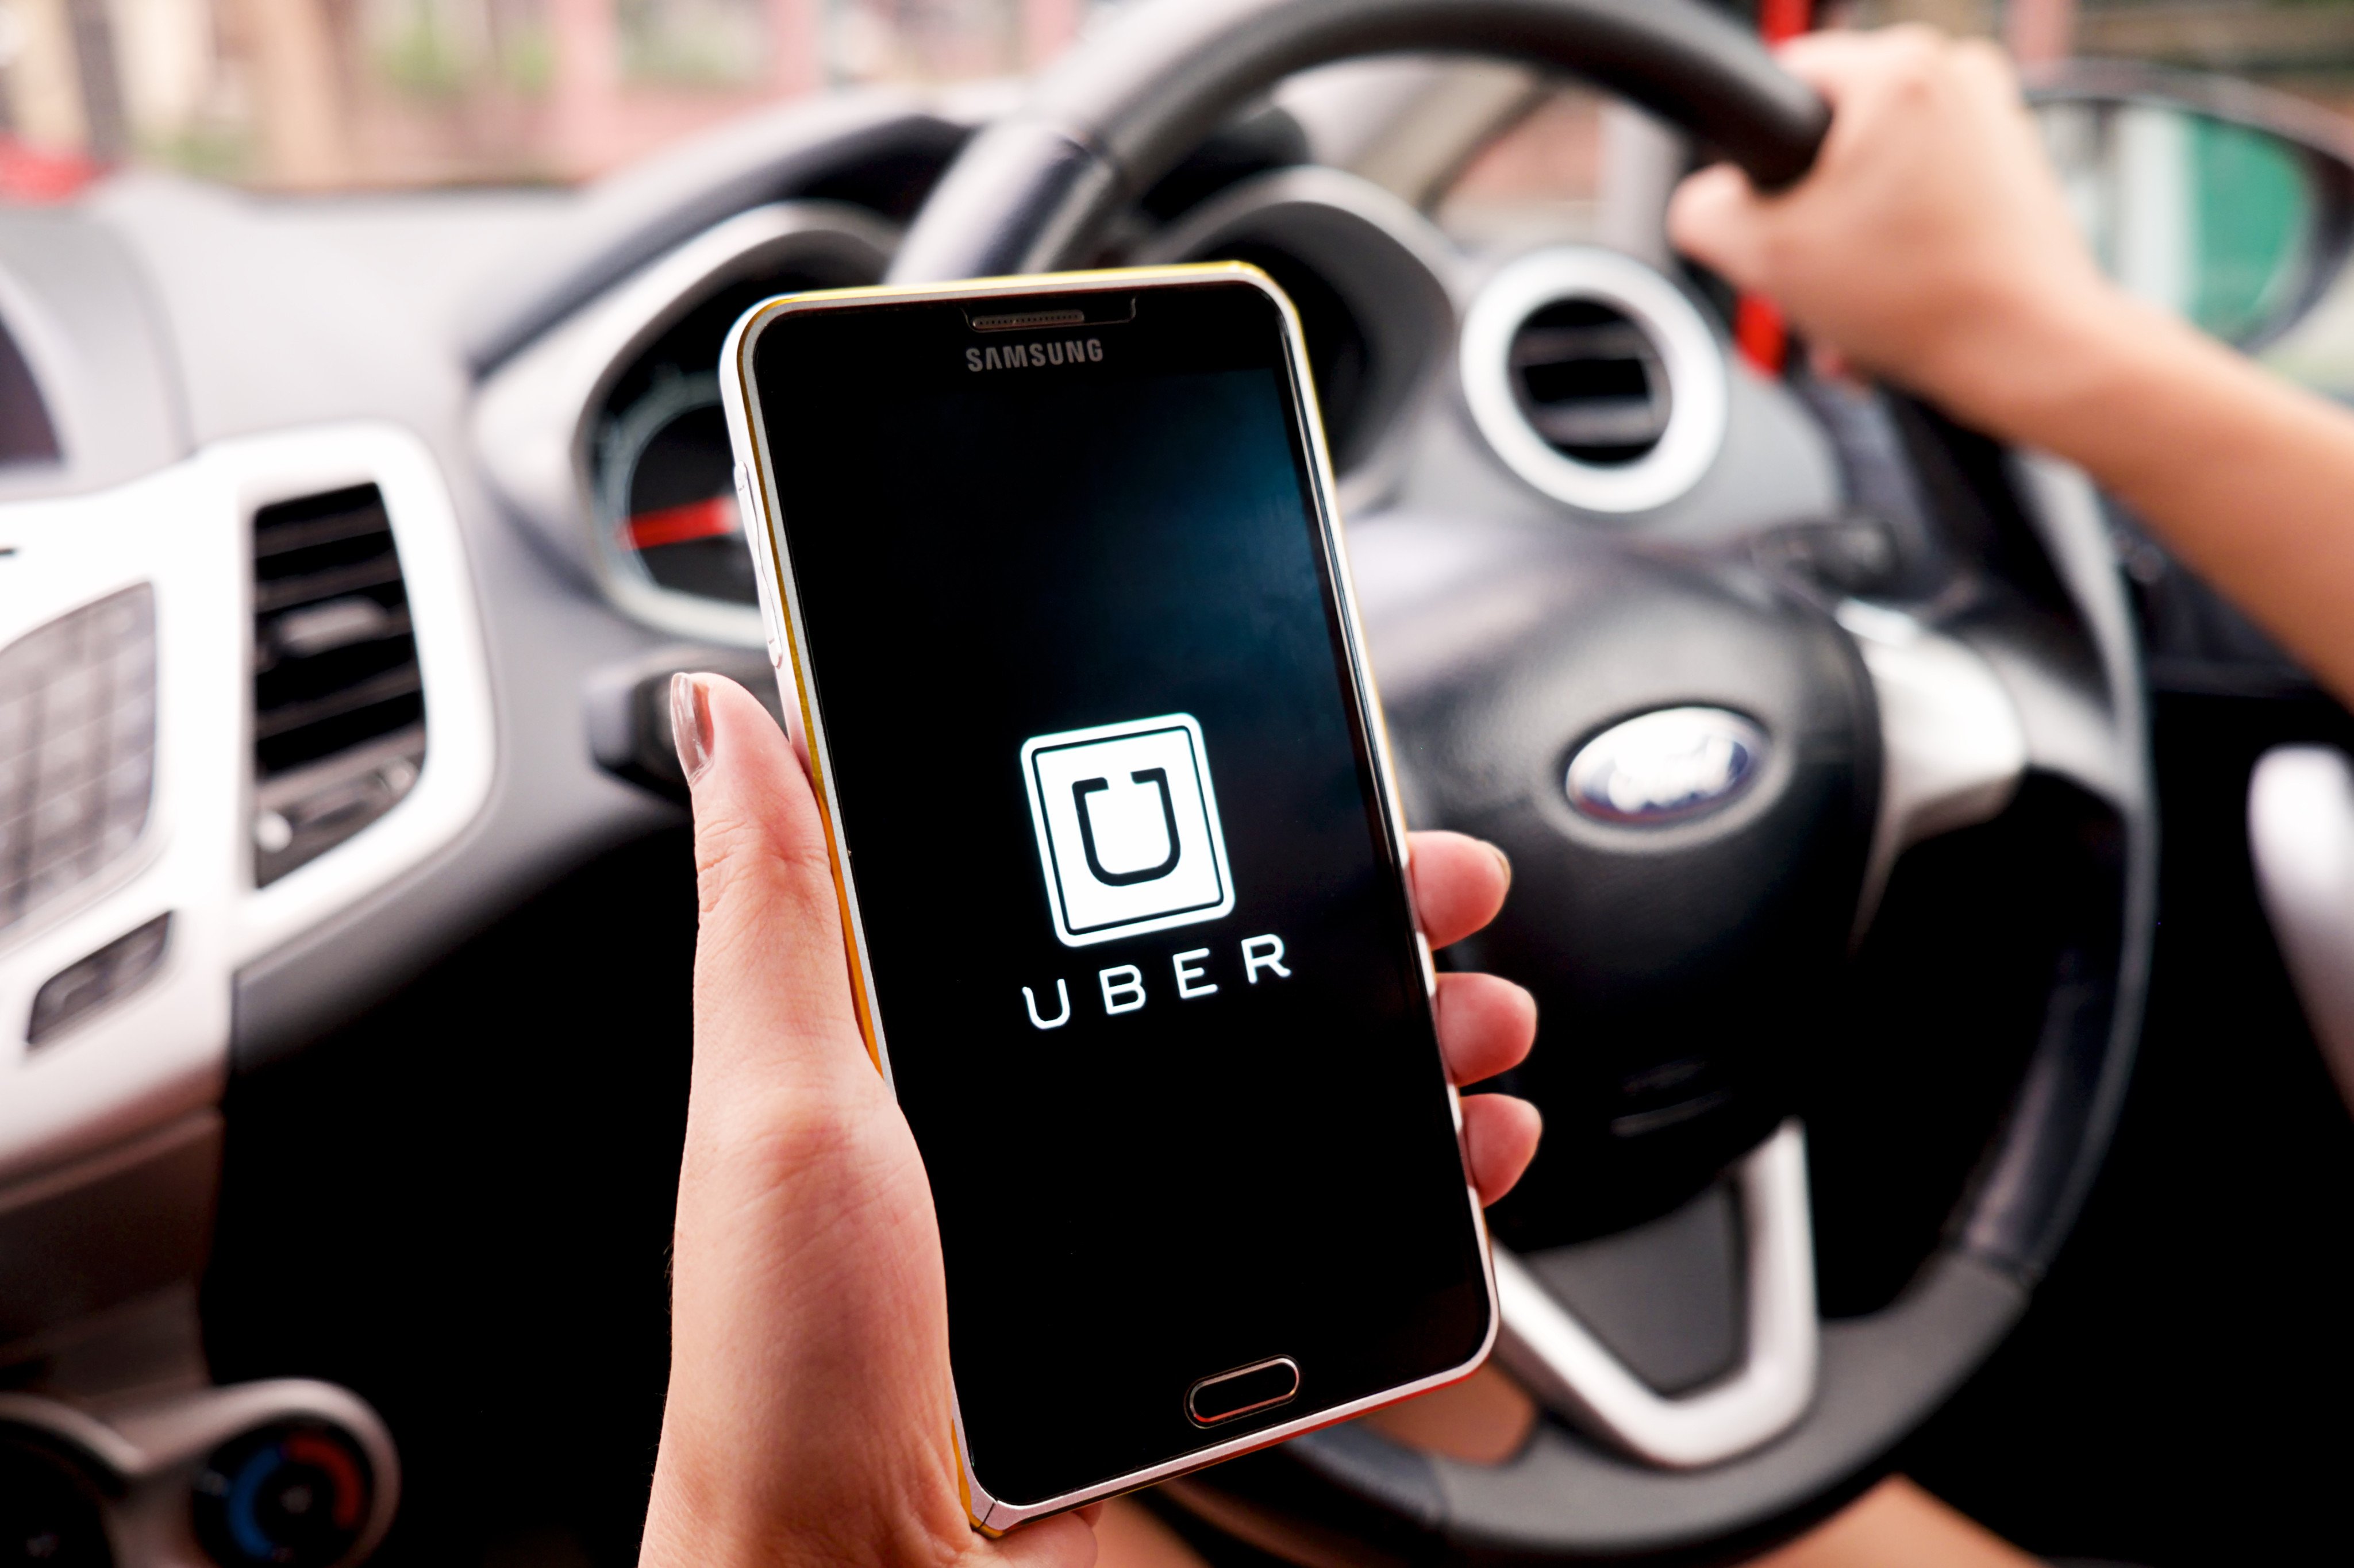 Hong Kong is currently weighing up regulatory options for ride-hailing services such as Uber. Photo: Shutterstock